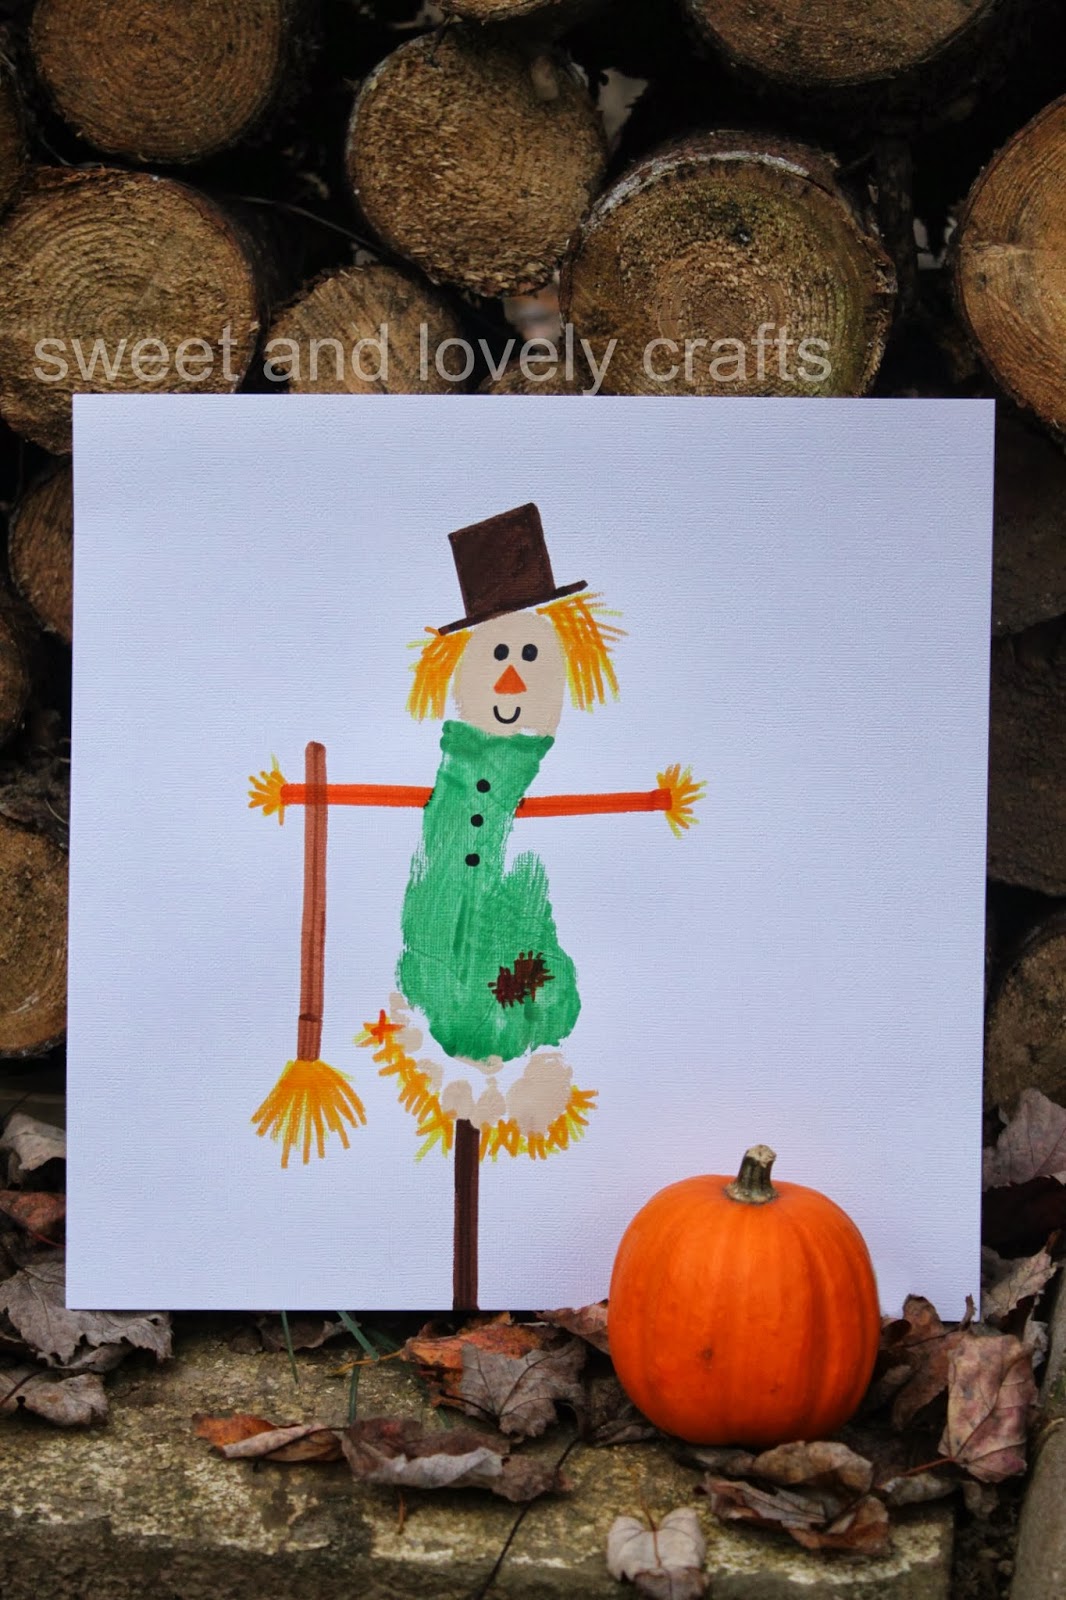 This footprint scarecrow would make a great holiday table topper